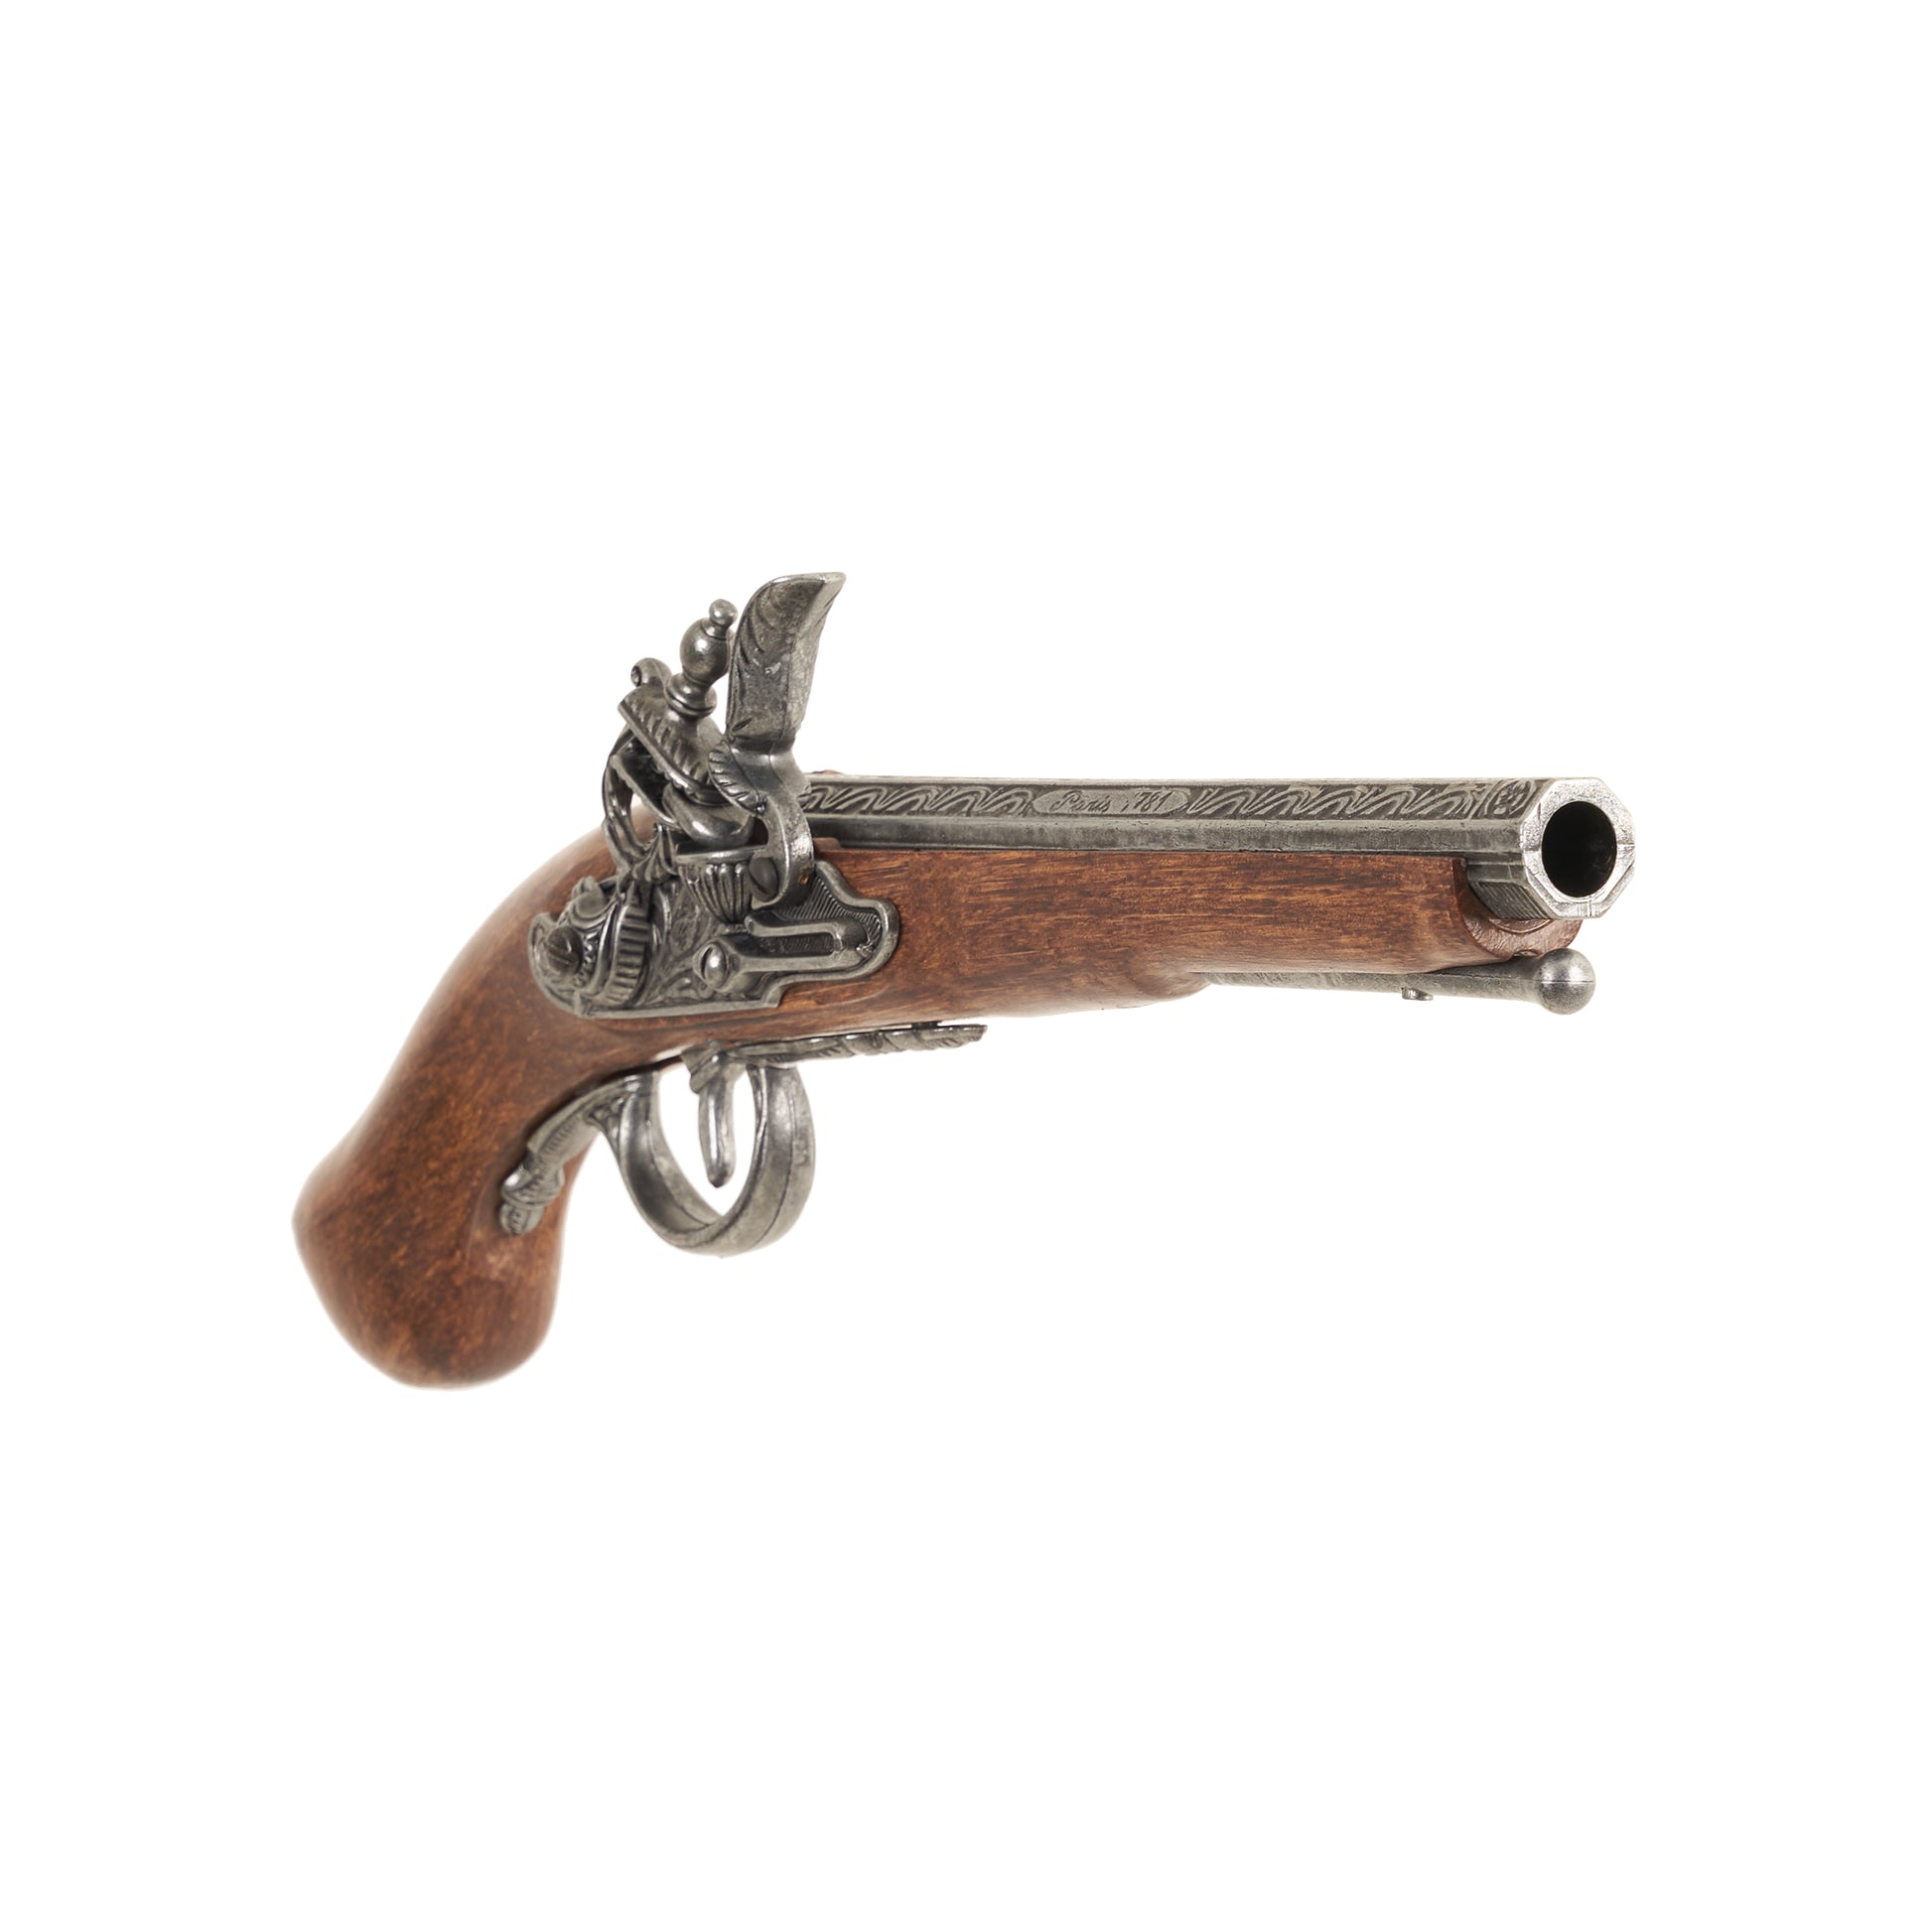 Front view of the Replica 18th Century Short Flintlock Pistol with intricately carved metal mechanisms, barrel, and carved faux wood grip